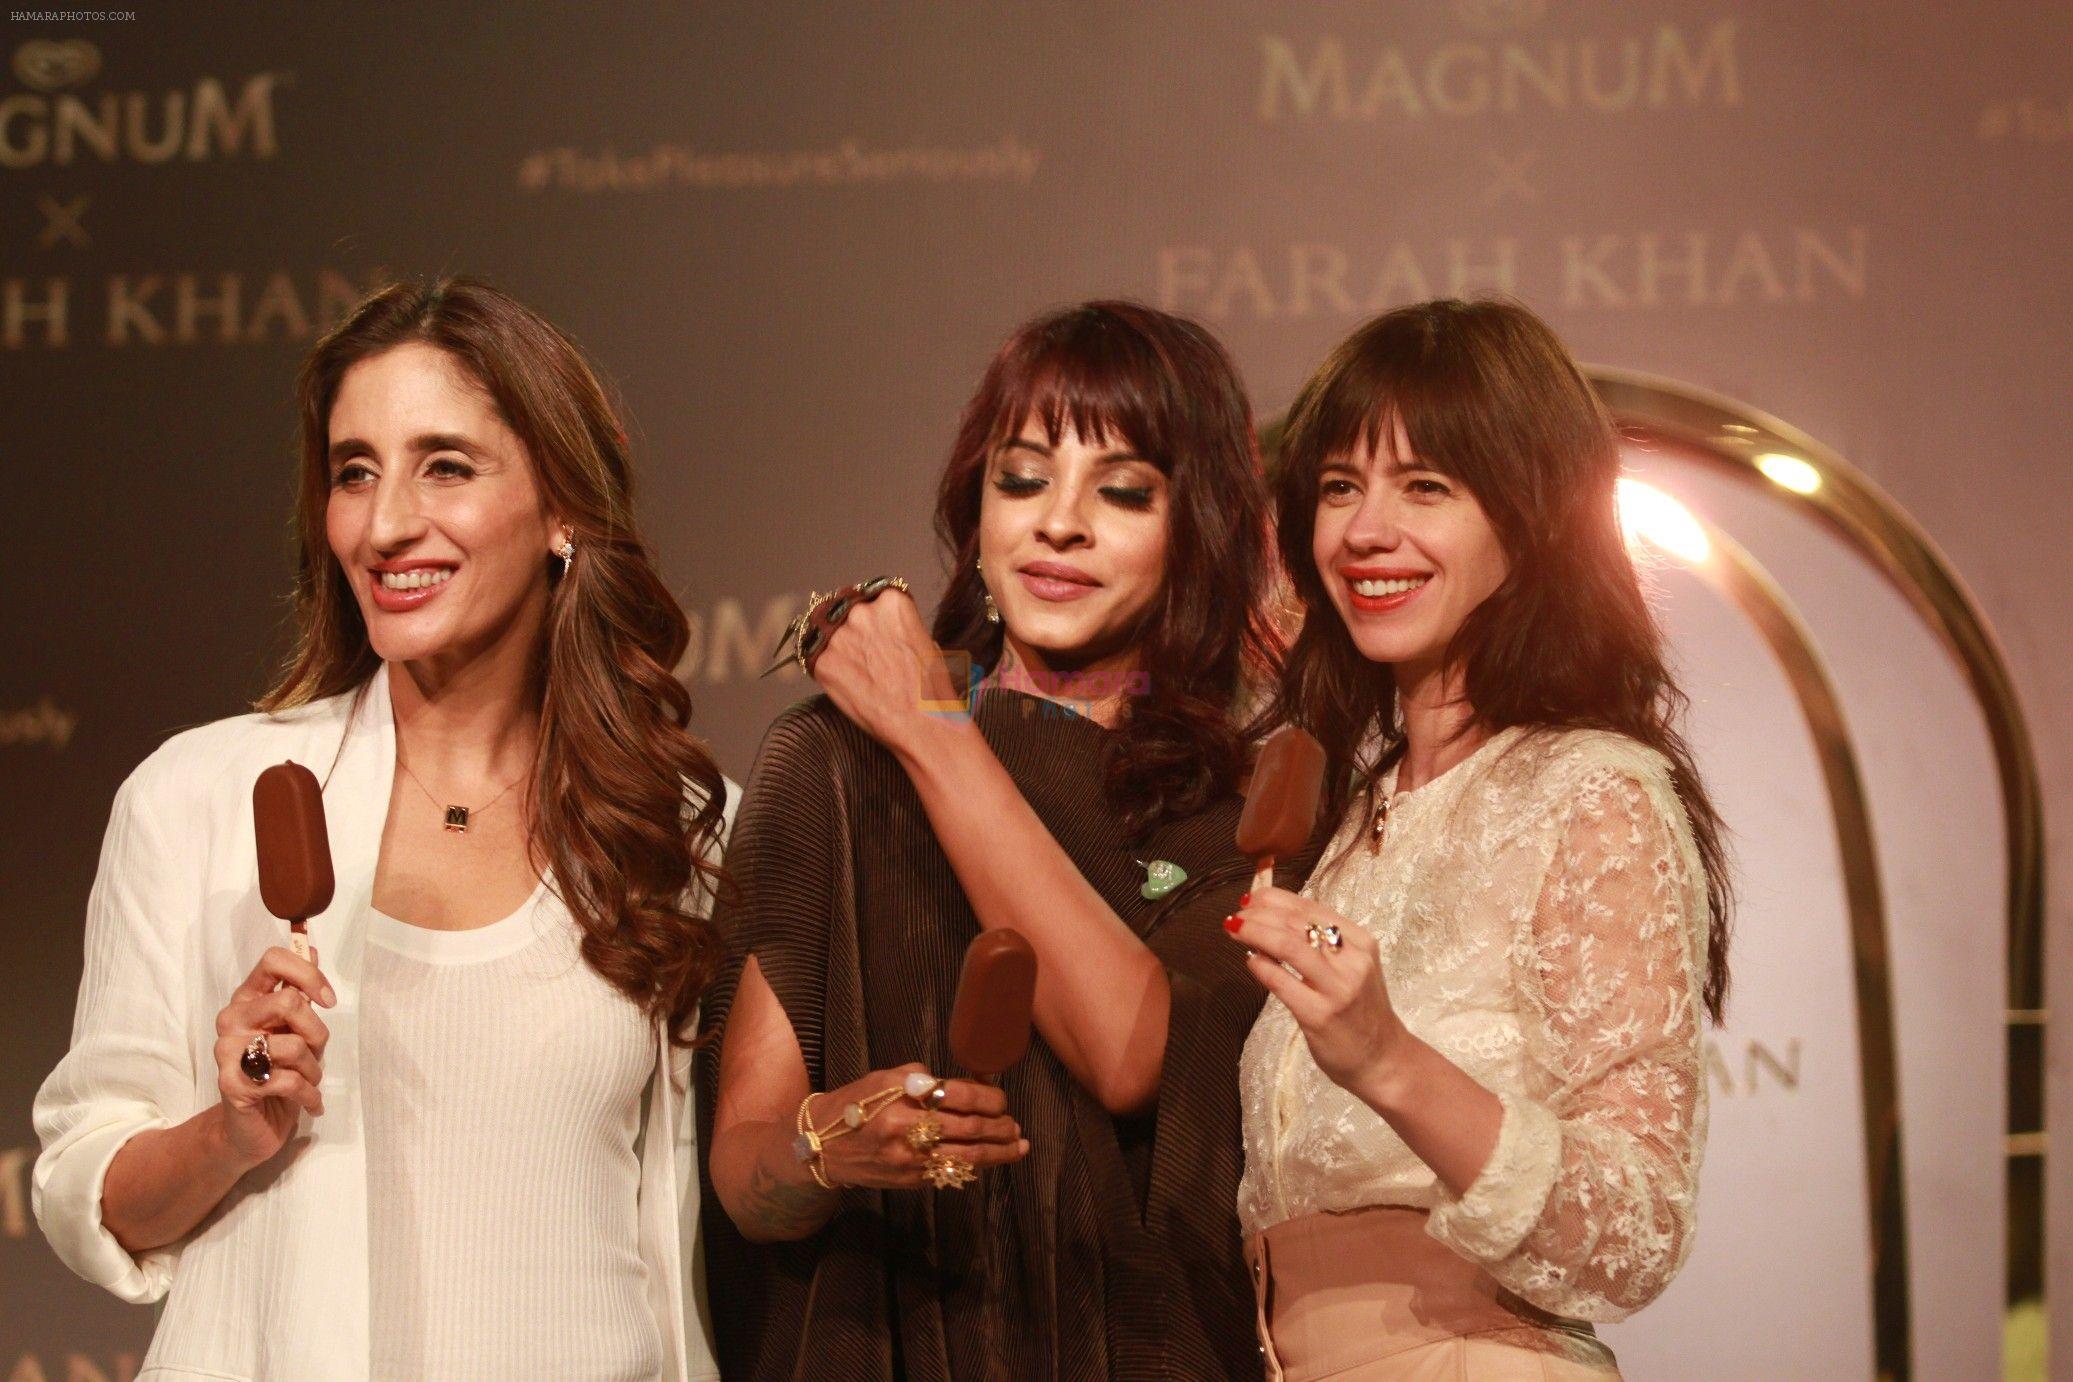 Kalki Koechlin, Farah Khan Ali unveil a collection of jewels in collaboration with Magnum on 24th April 2018